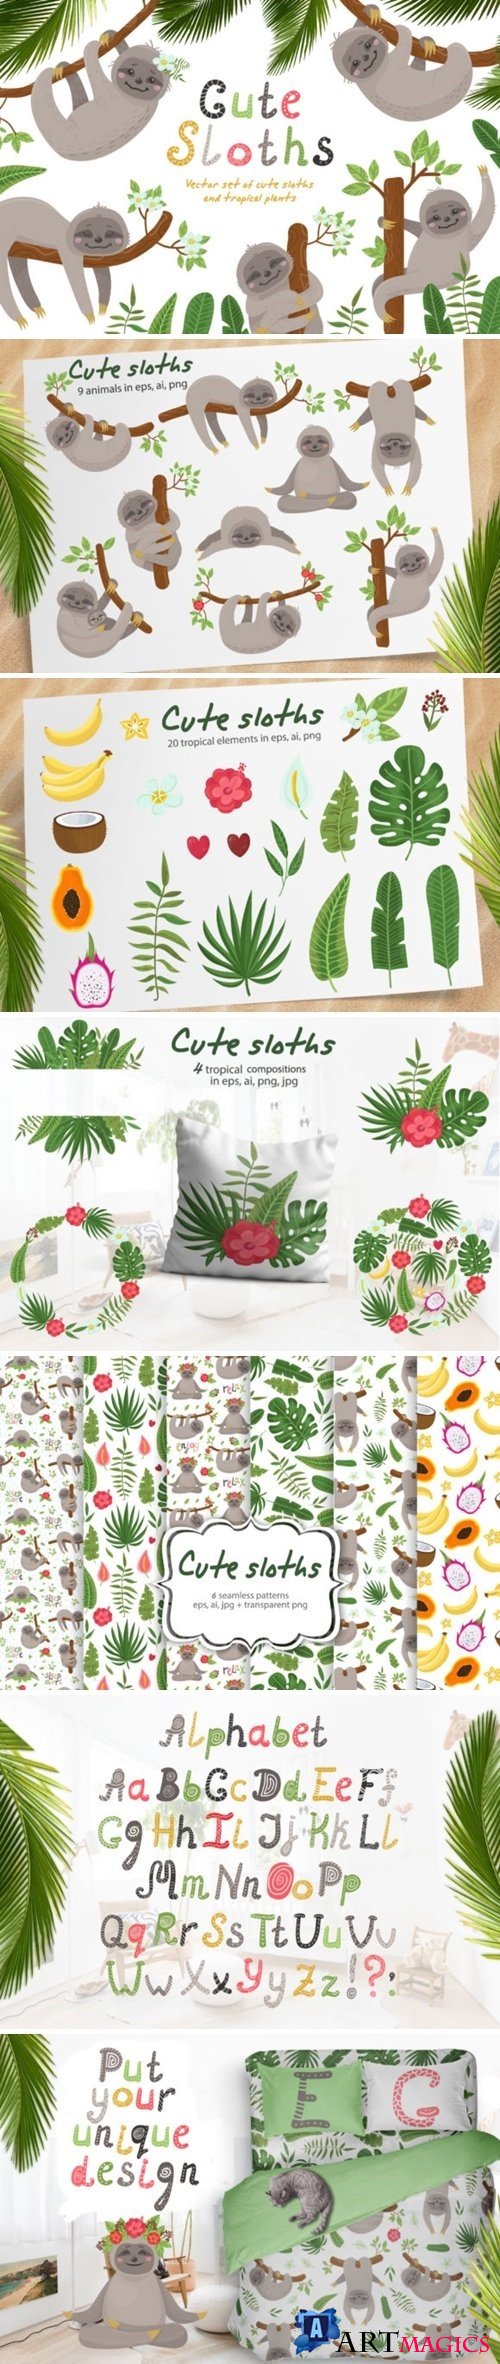 Cute sloths and tropical plants - 3427699